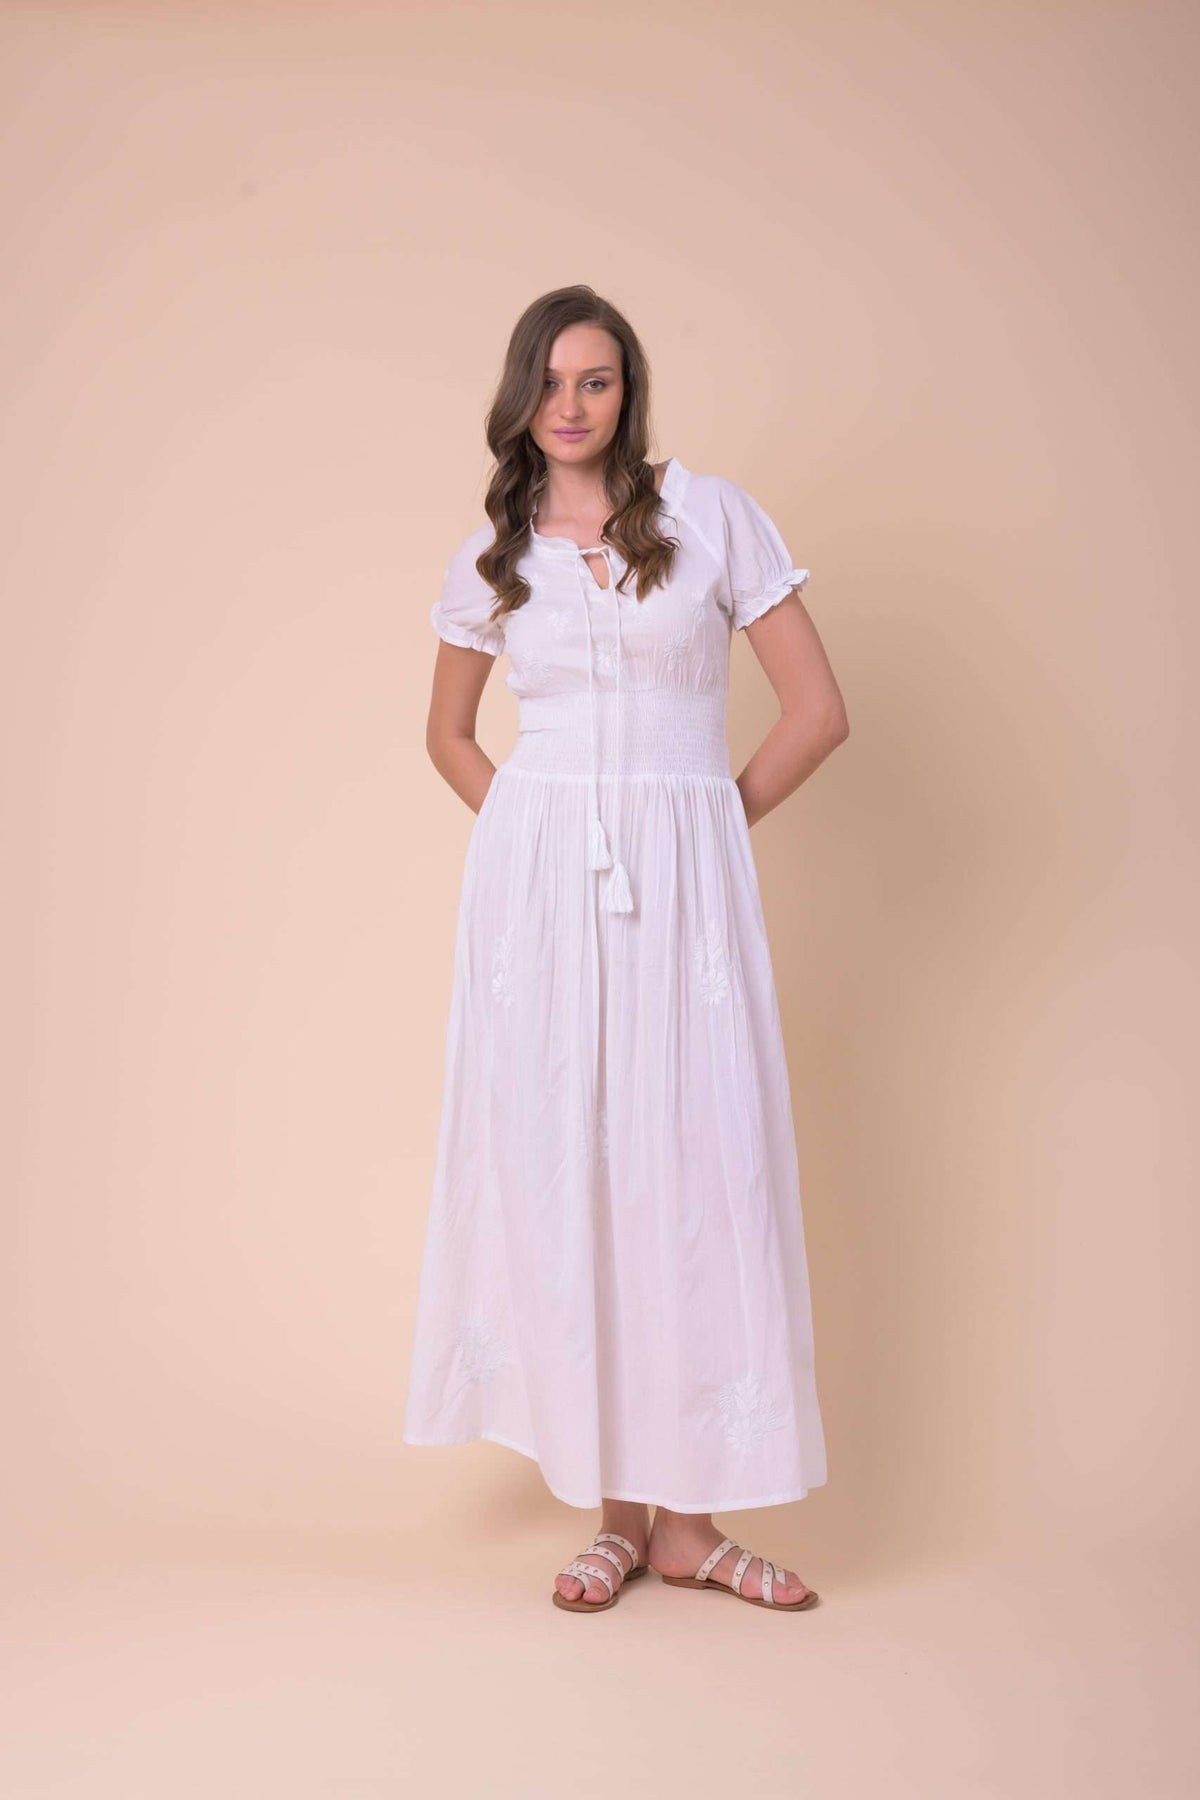 White cotton dress with a shirred waist detail and short sleeves